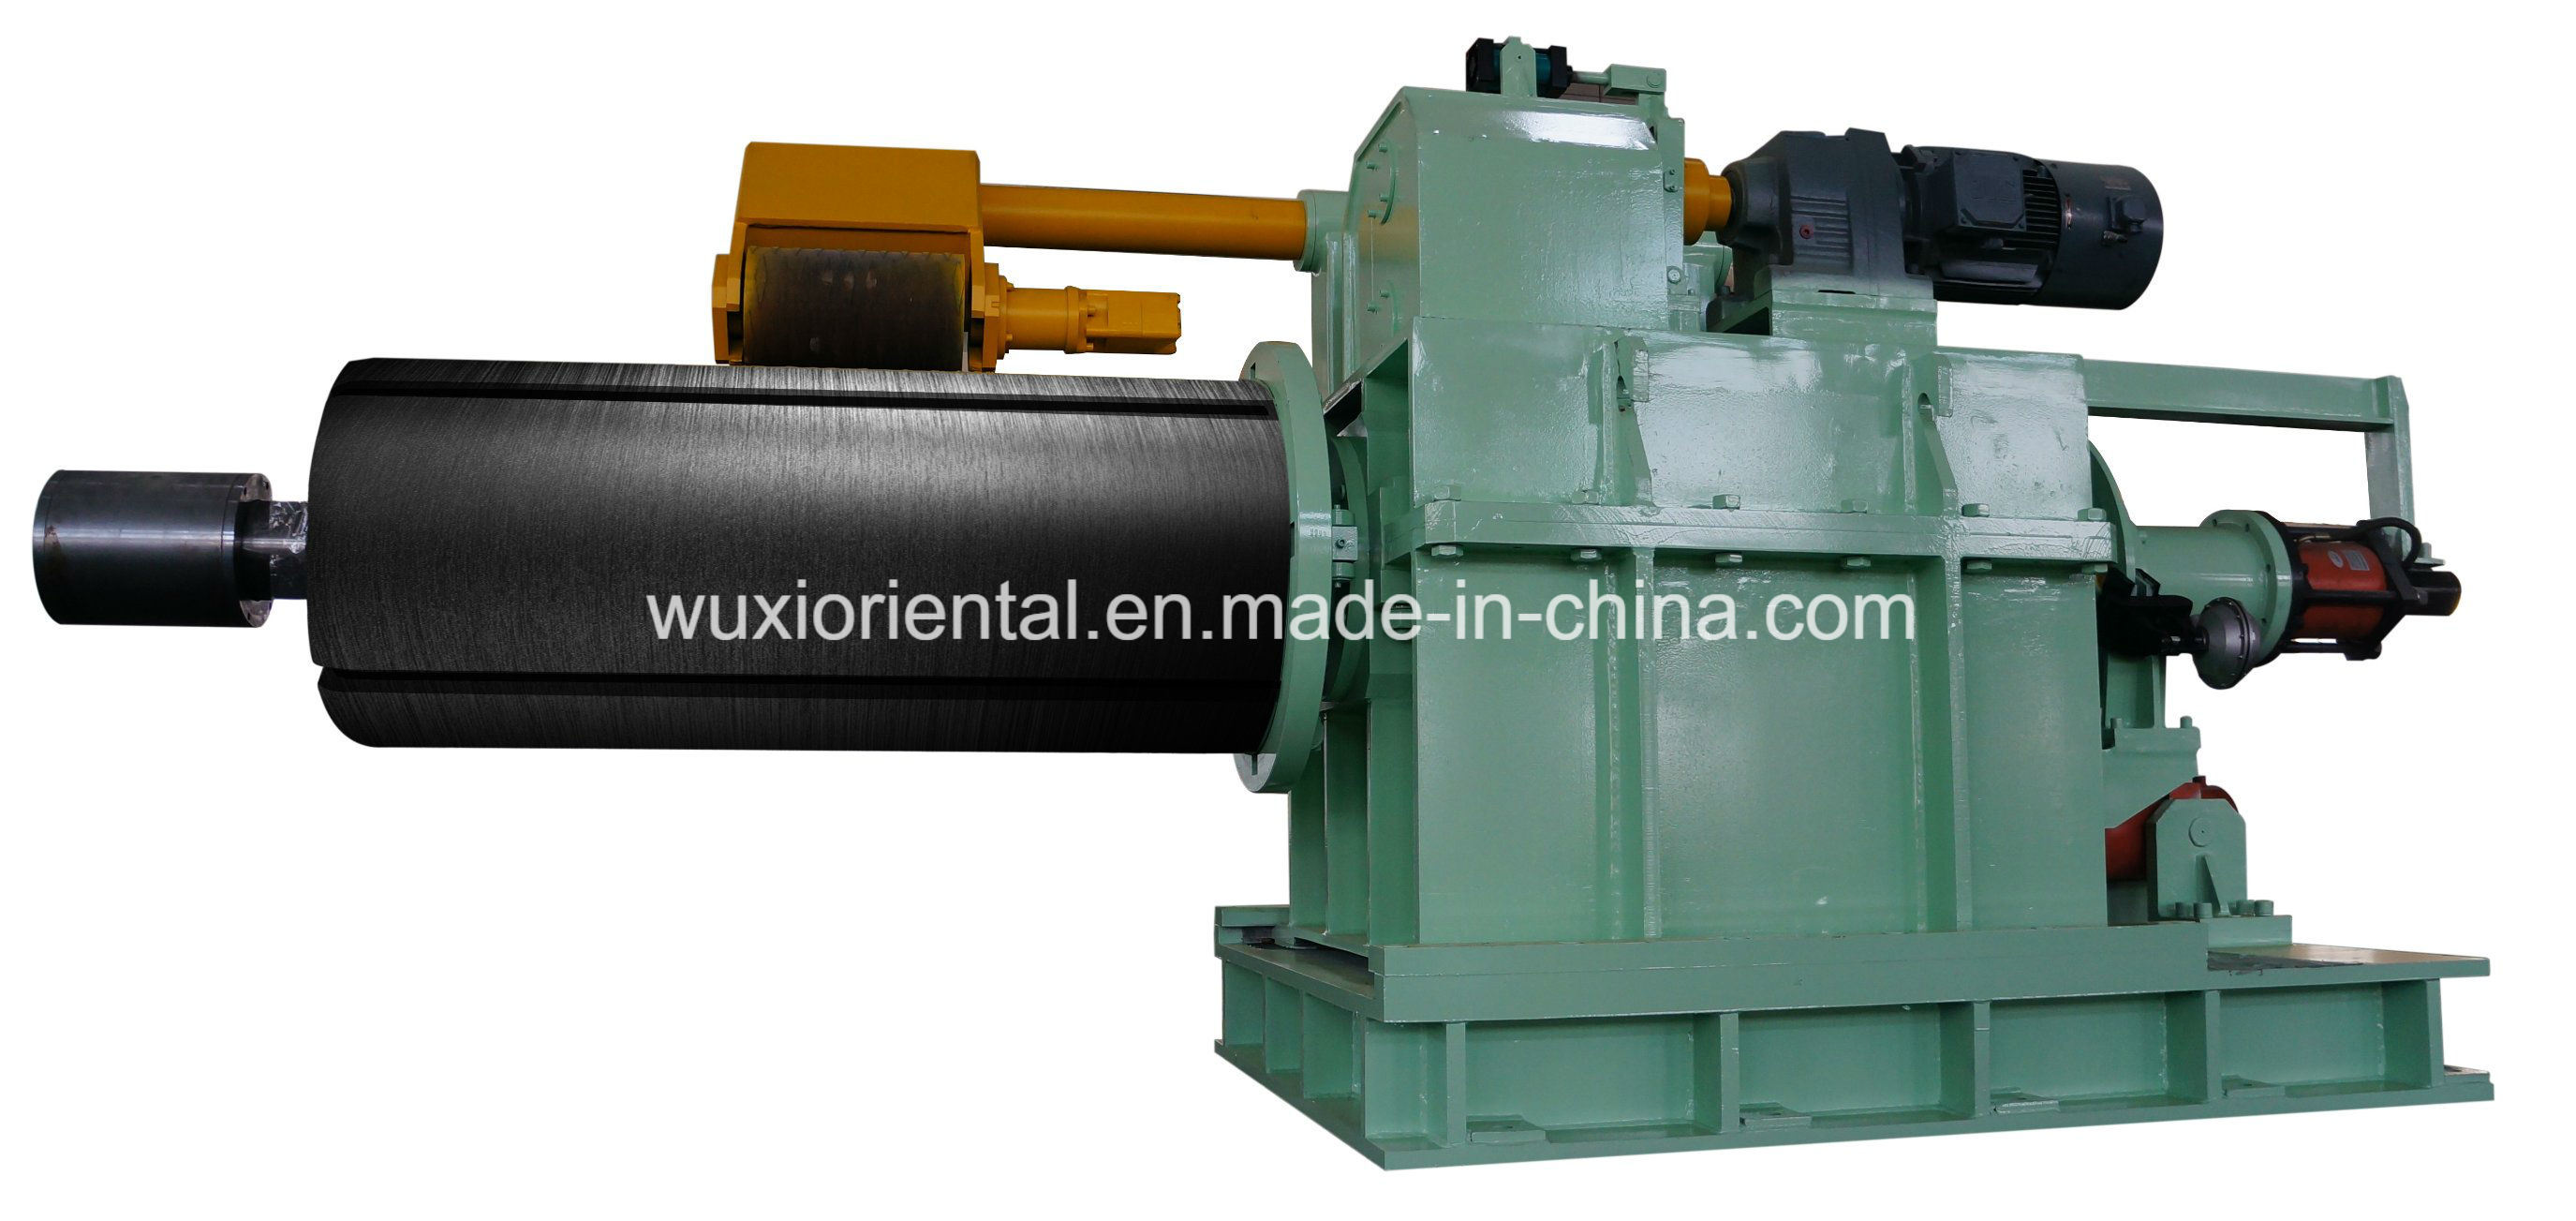 China Single-Arm Decoiler Uncoiler Expansion Type Cut to Length Line Slitting Line 20t Coil